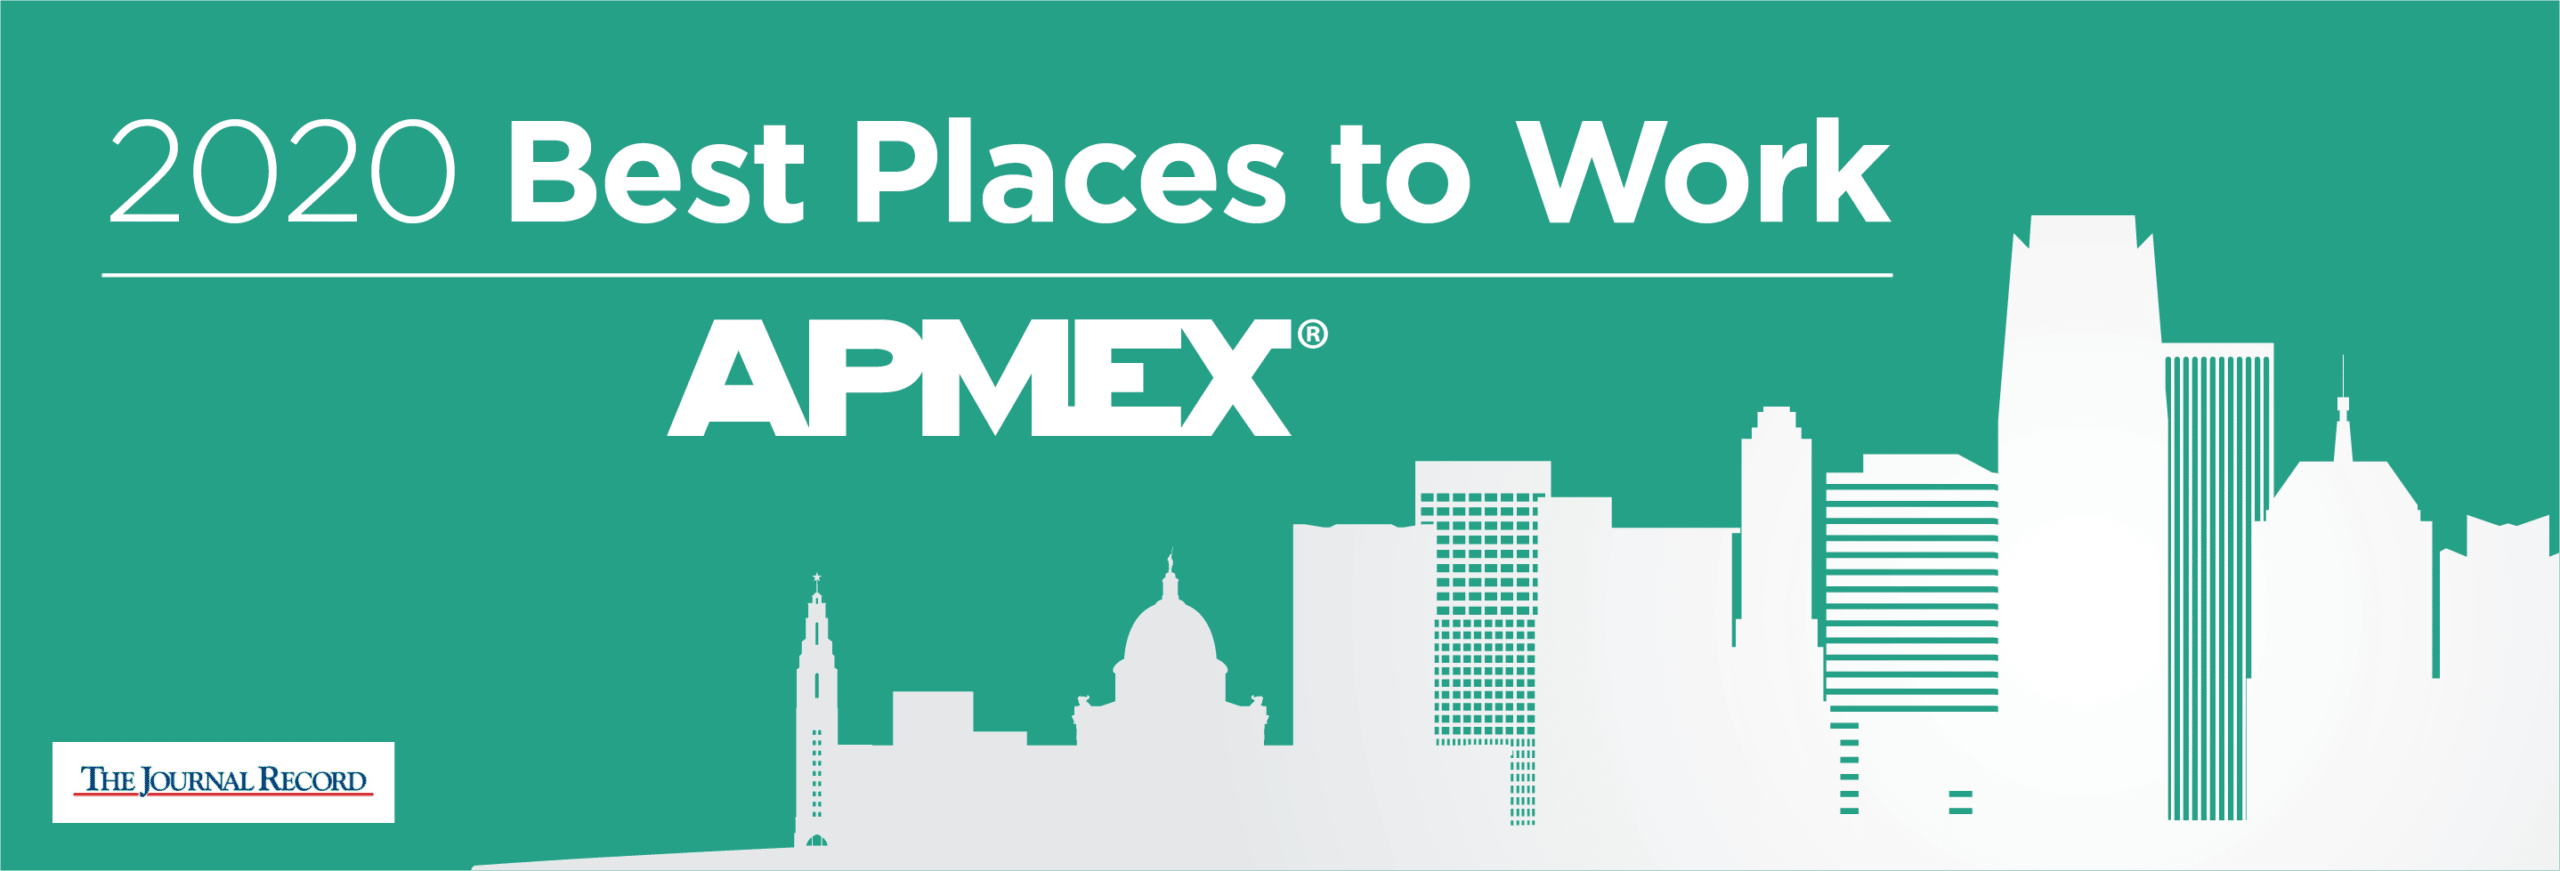 2020 Best Place to Work: APMEX.